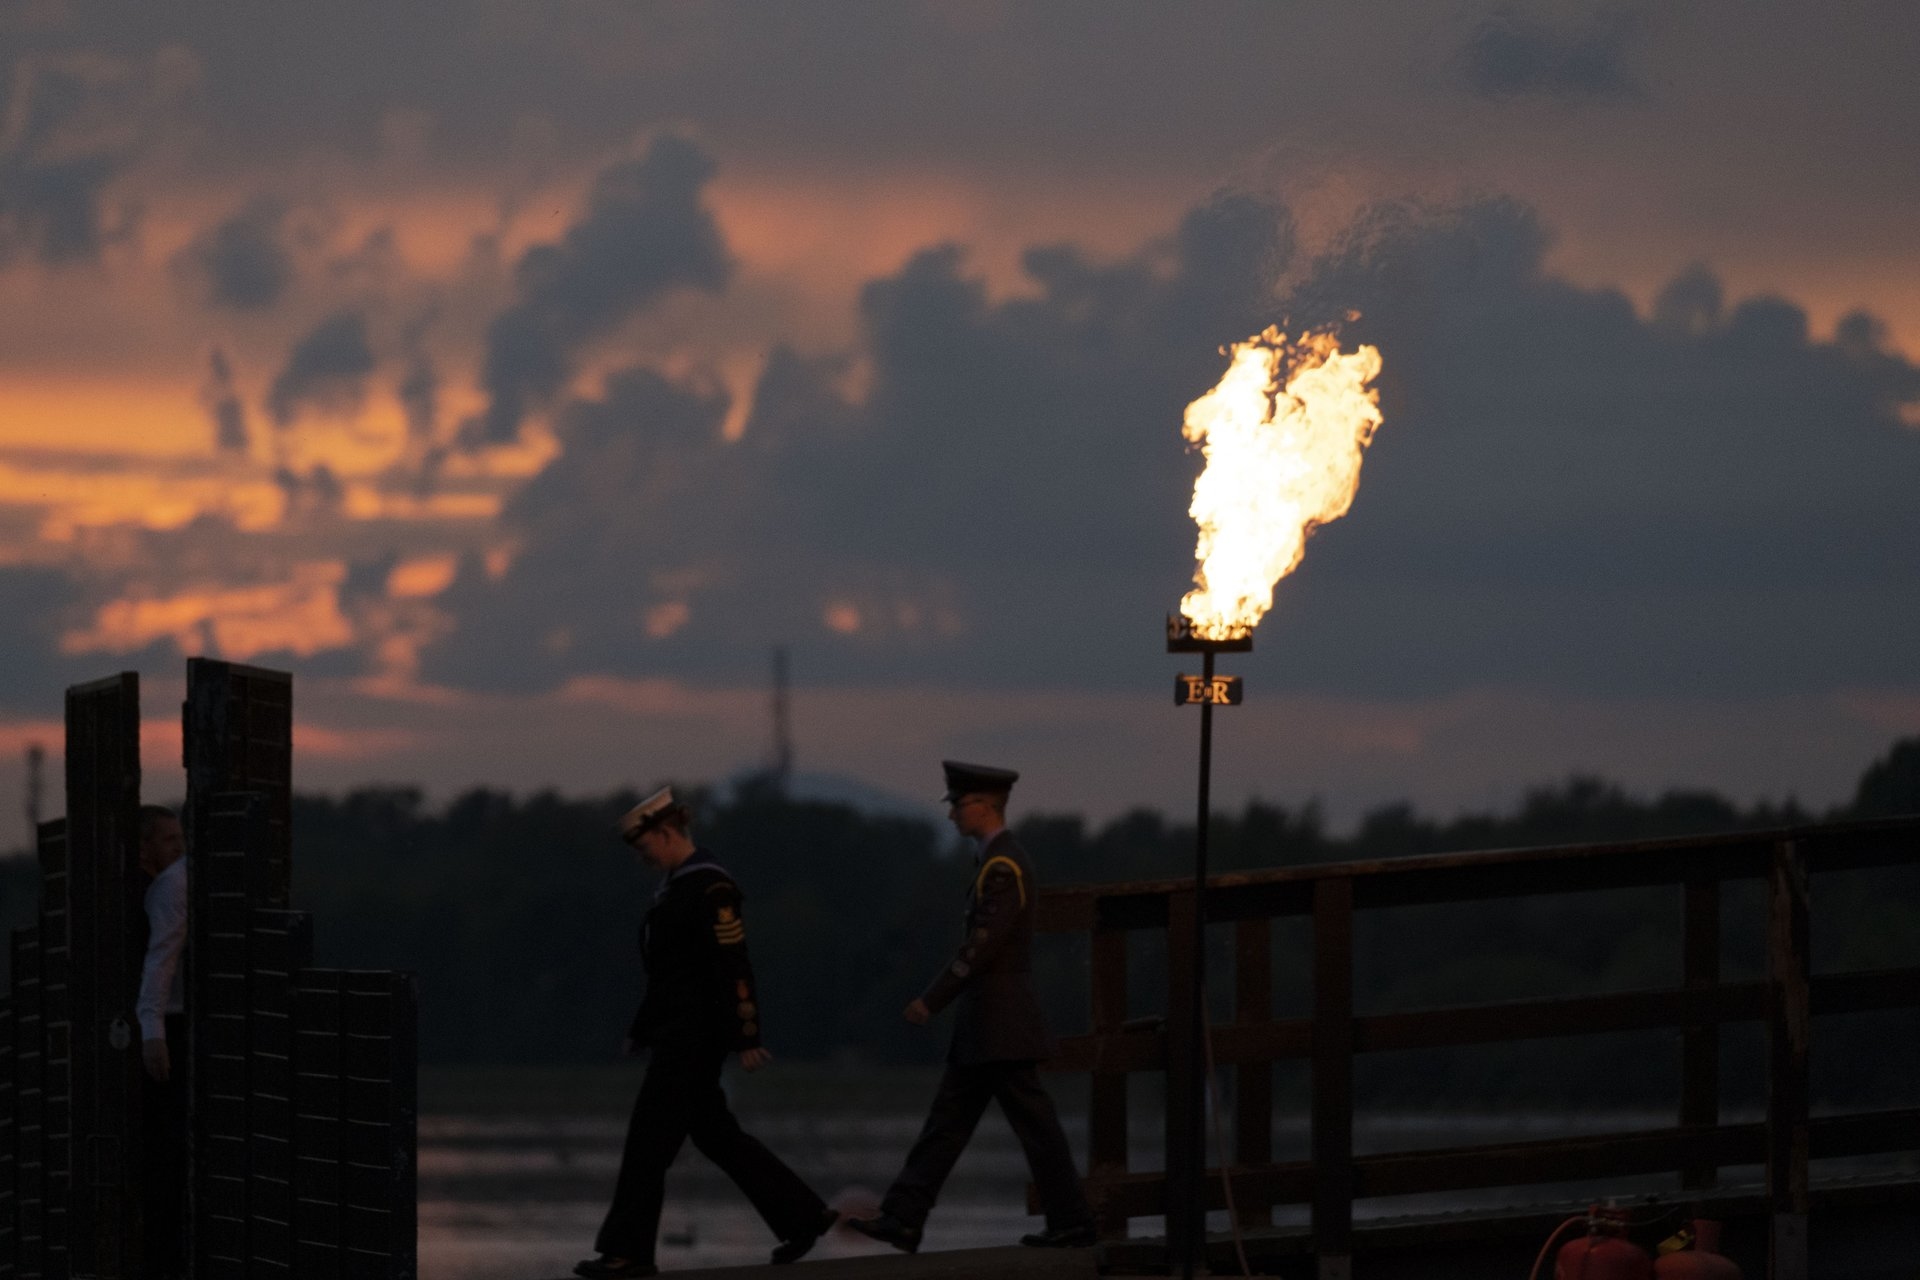 Strathclyde Country Park beacon-lighting ceremony to celebrate The Queen's Platinum Jubilee